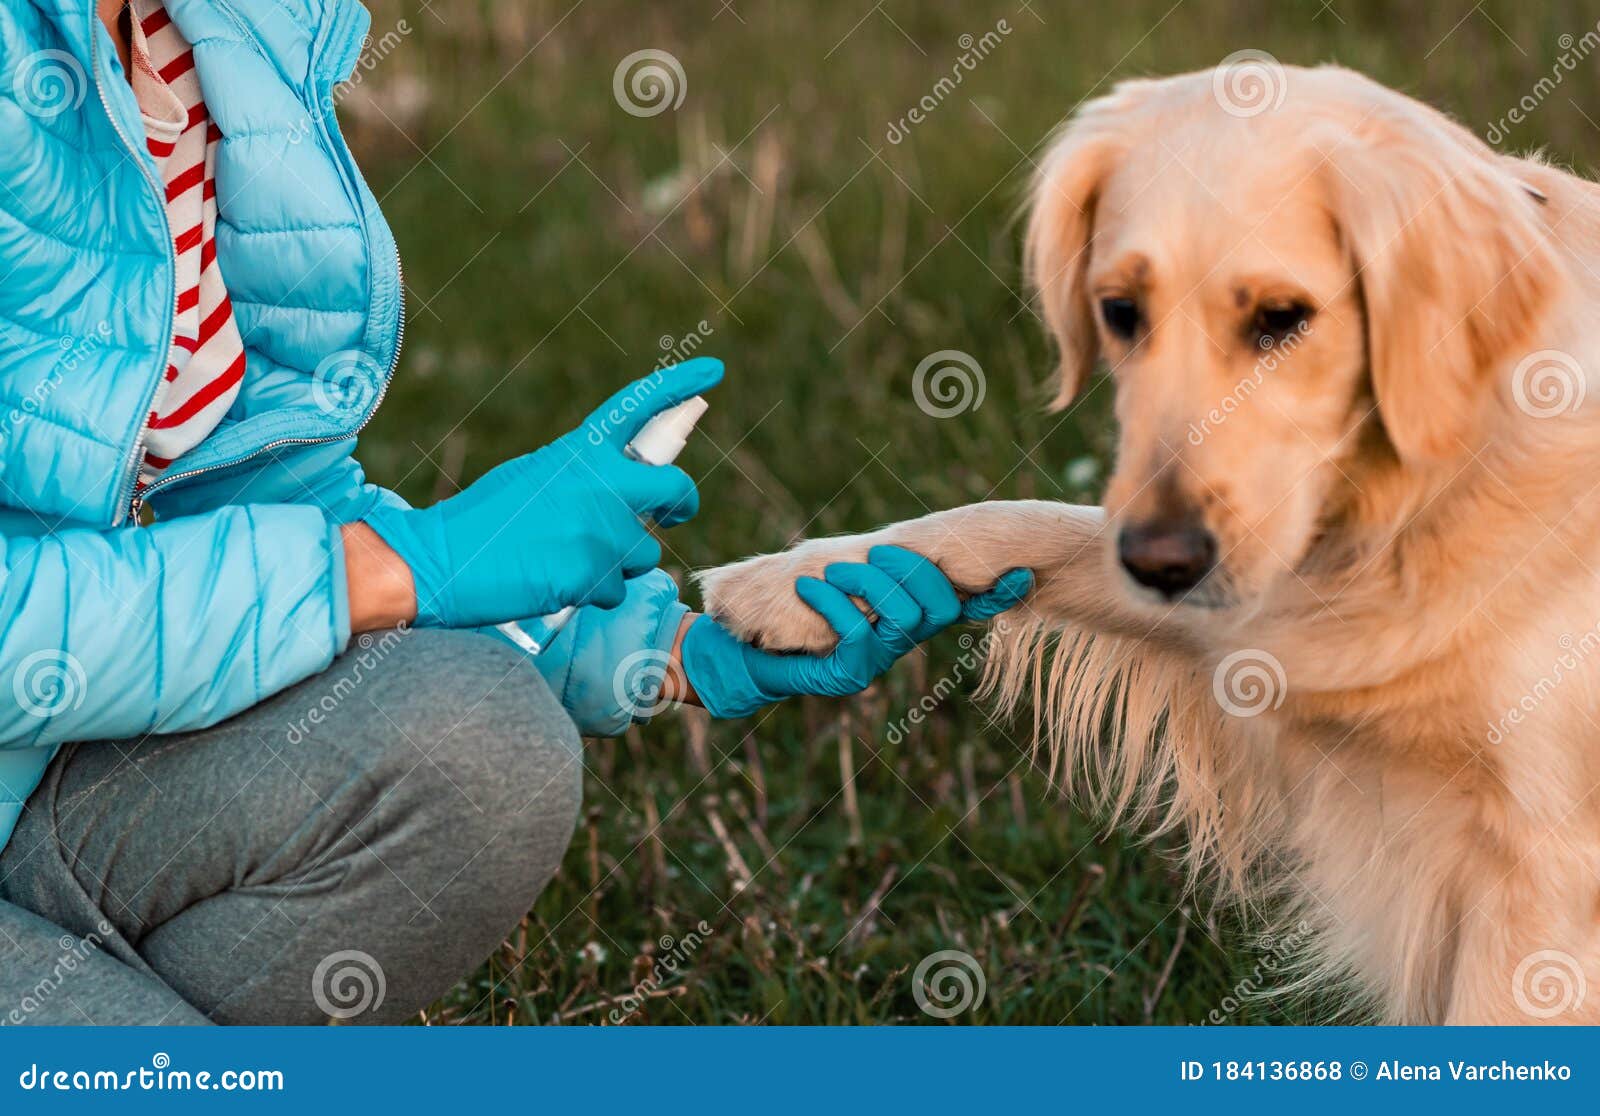 disinfect dog paws